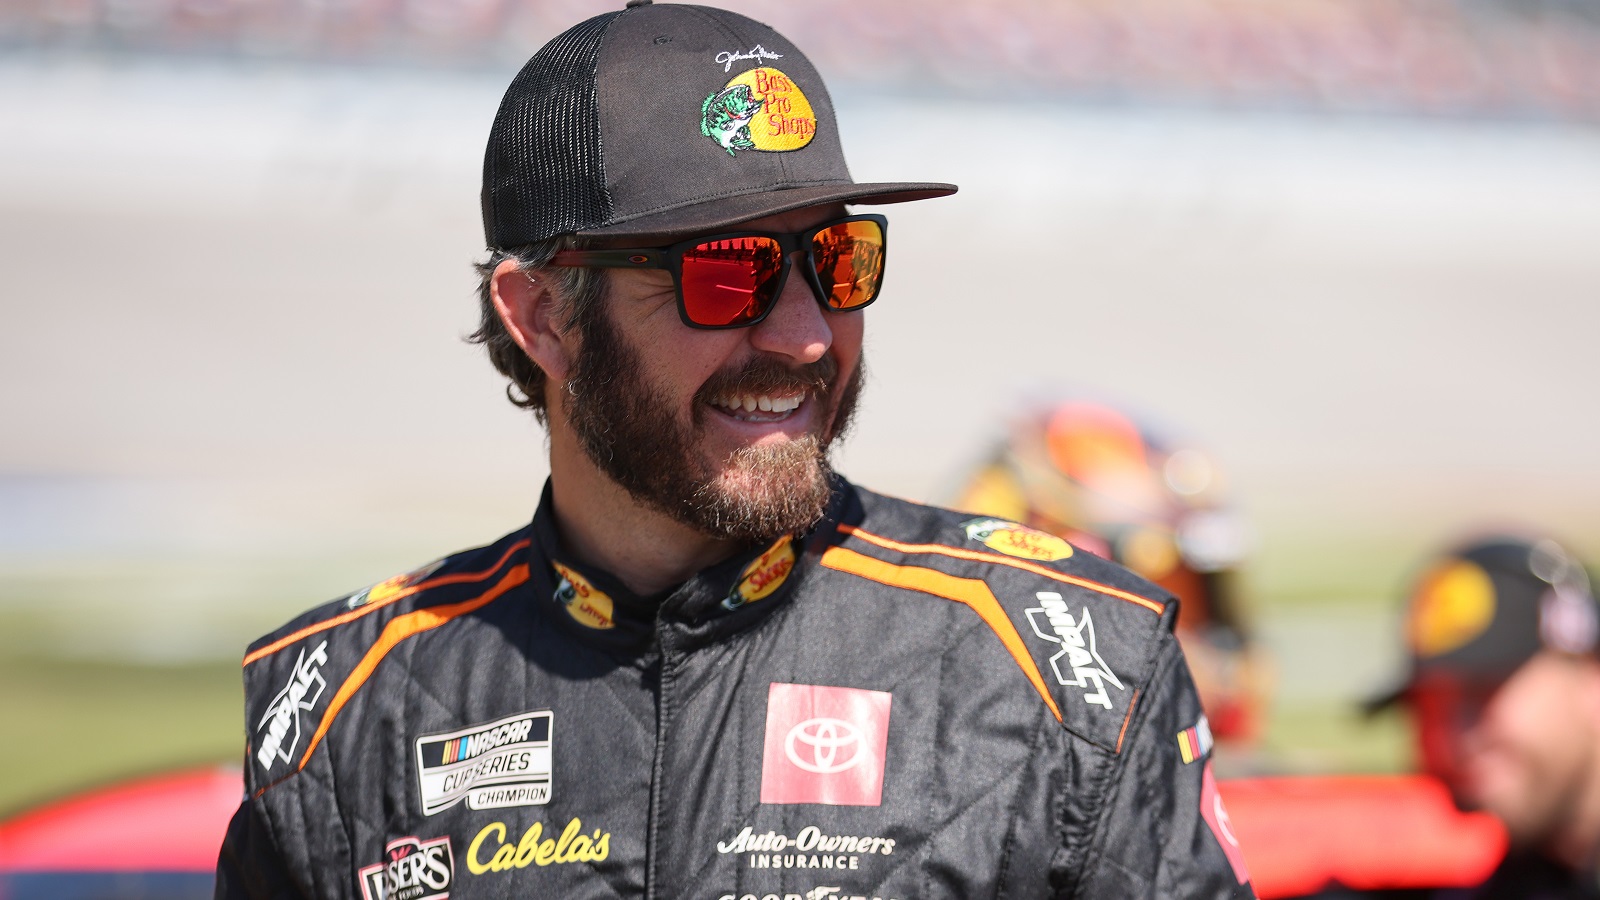 Martin Truex Jr. walks the grid during qualifying for the NASCAR Cup Series GEICO 500 at Talladega Superspeedway on April 23, 2022. | James Gilbert/Getty Images